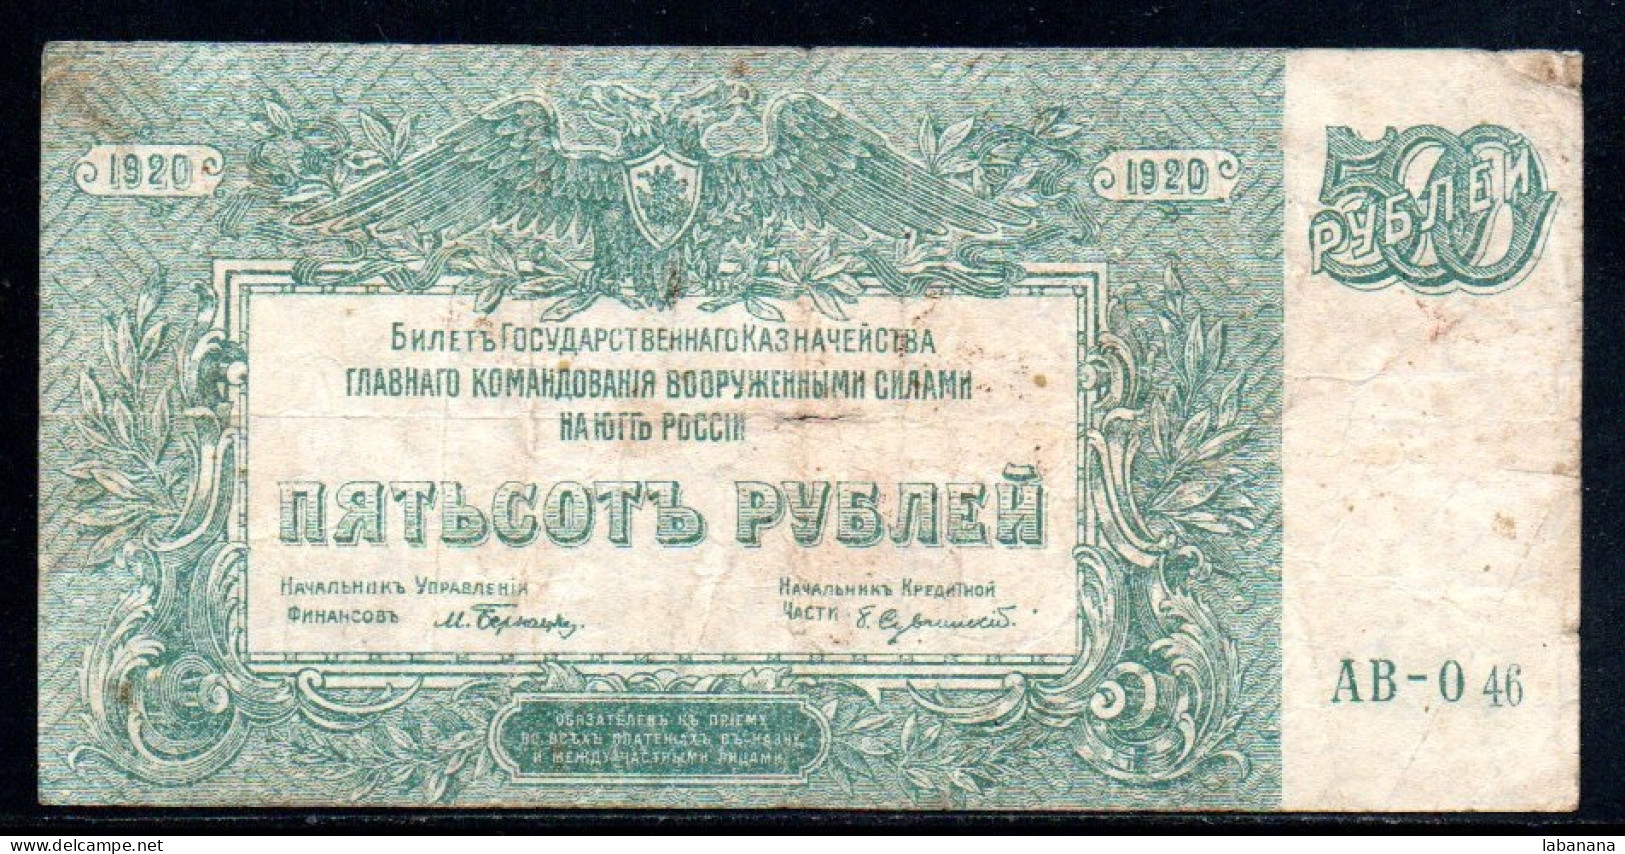 495-Russie Du Sud 500 Roubles 1920 AB-046 - Russia